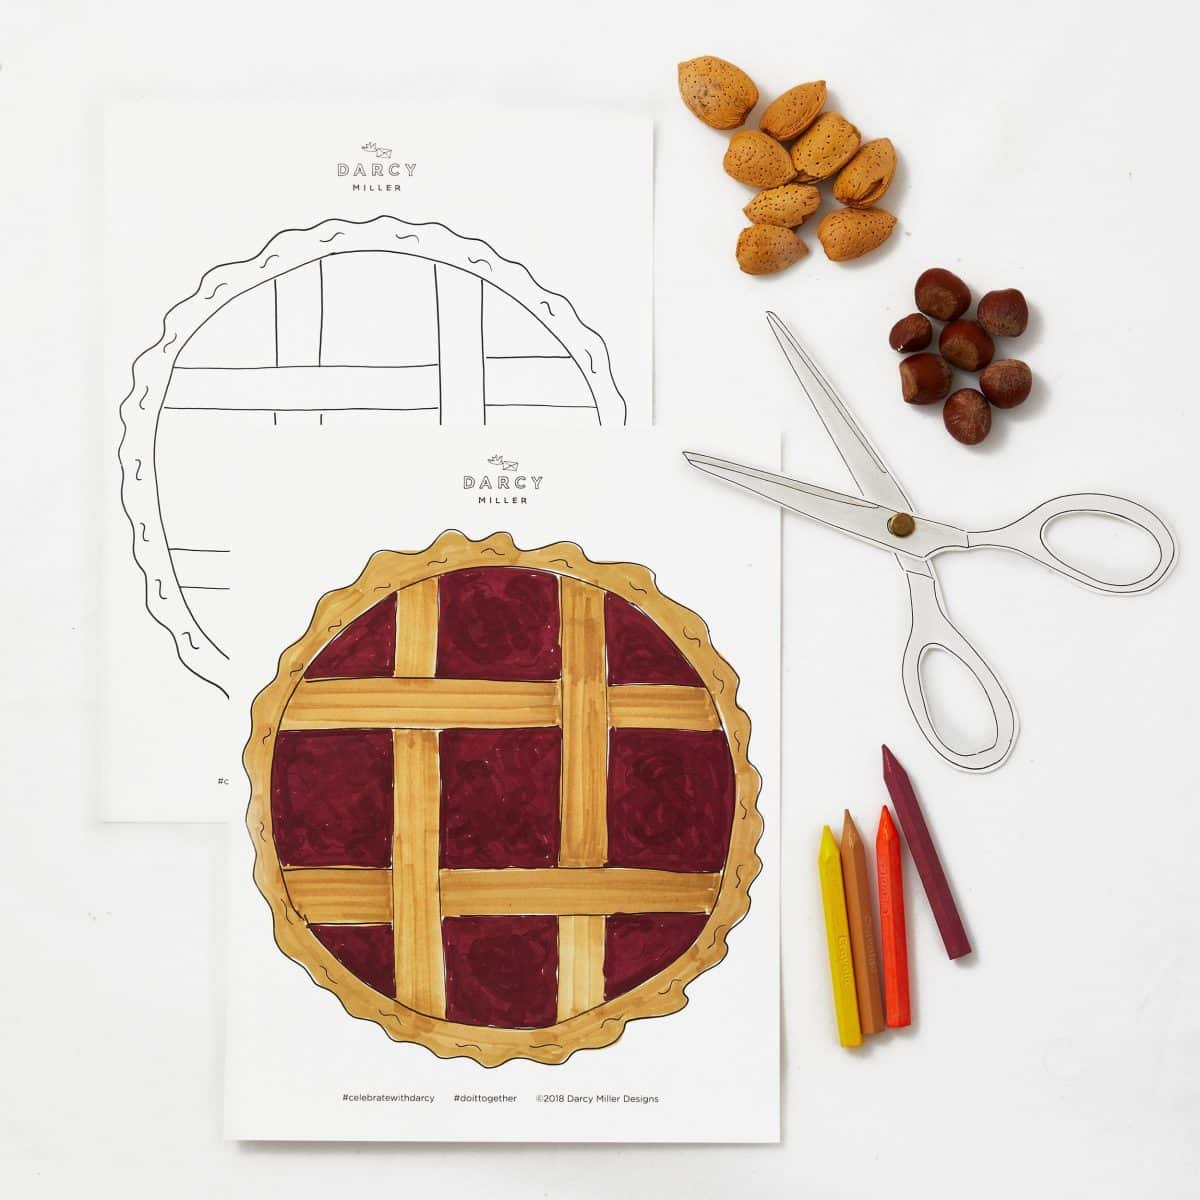 This pie placemat is definitely something to be thankful for! Print out the colored template and let everyone choose their playing pieces (nuts, candies, and small fruit all work) for rousing pre-dinner games of Tic Tac Toe.